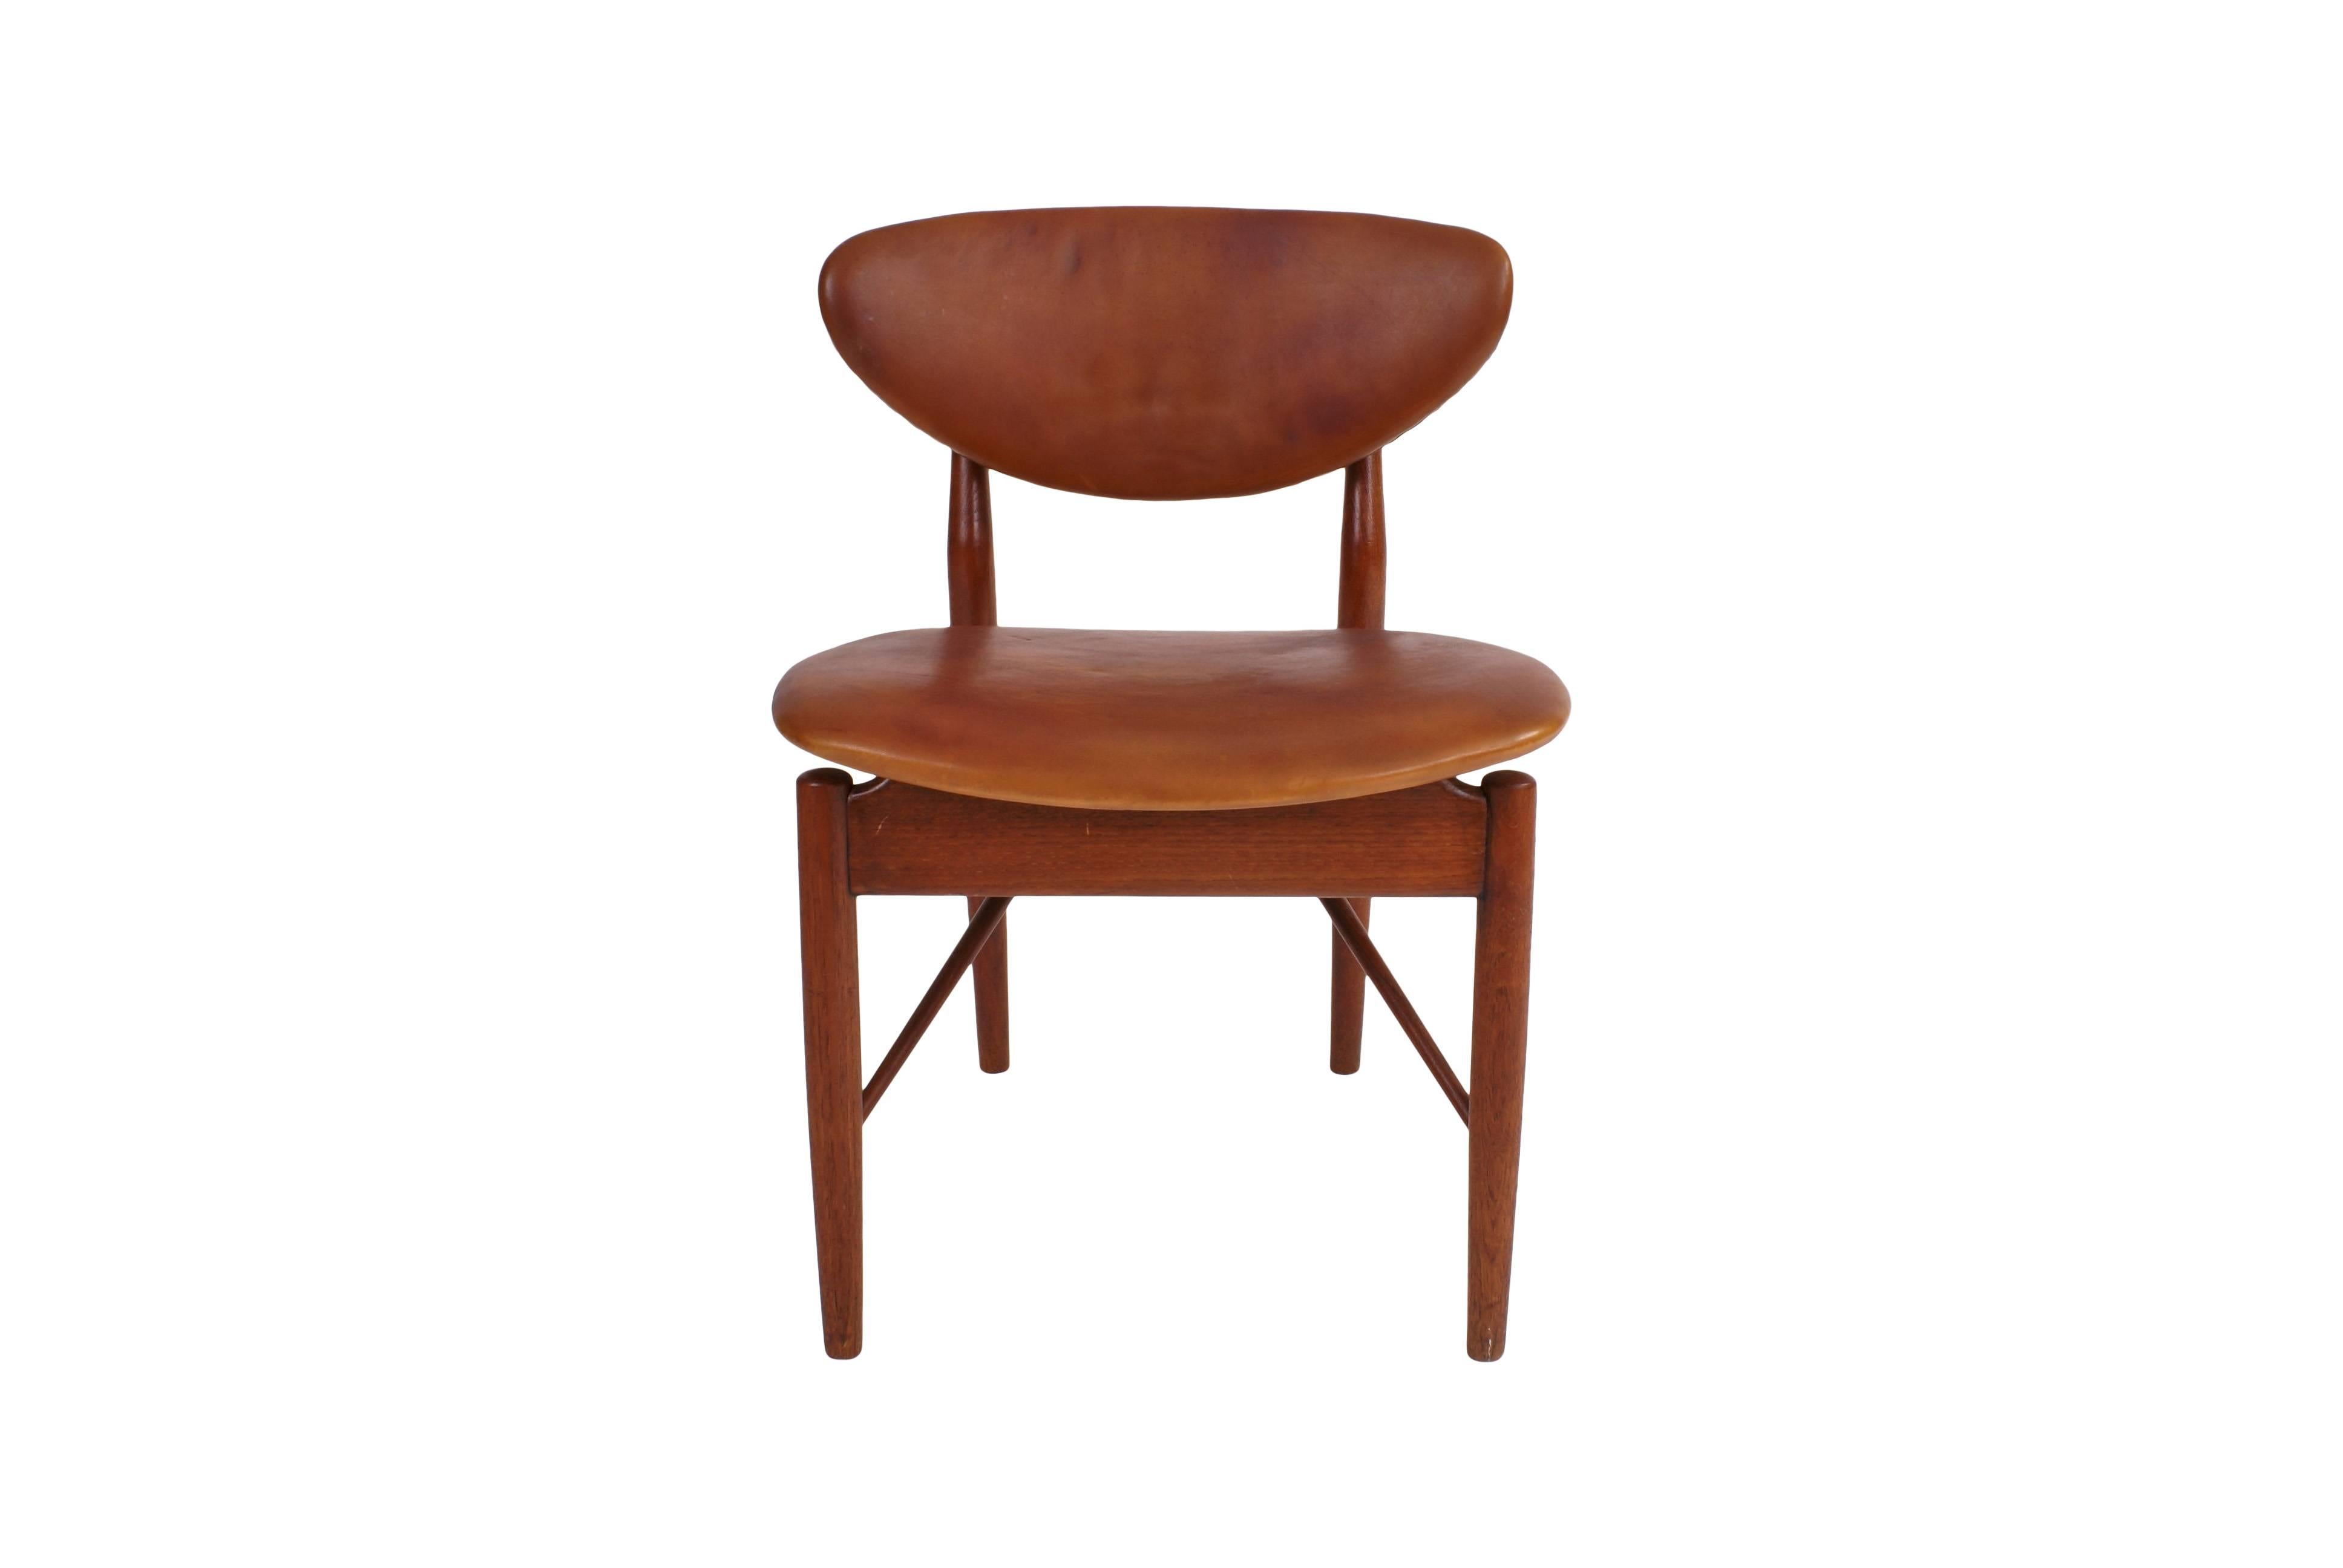 Mid-20th Century Finn Juhl NV55 Chair for Niels Vodder in Teak and Natural Leather, 1955